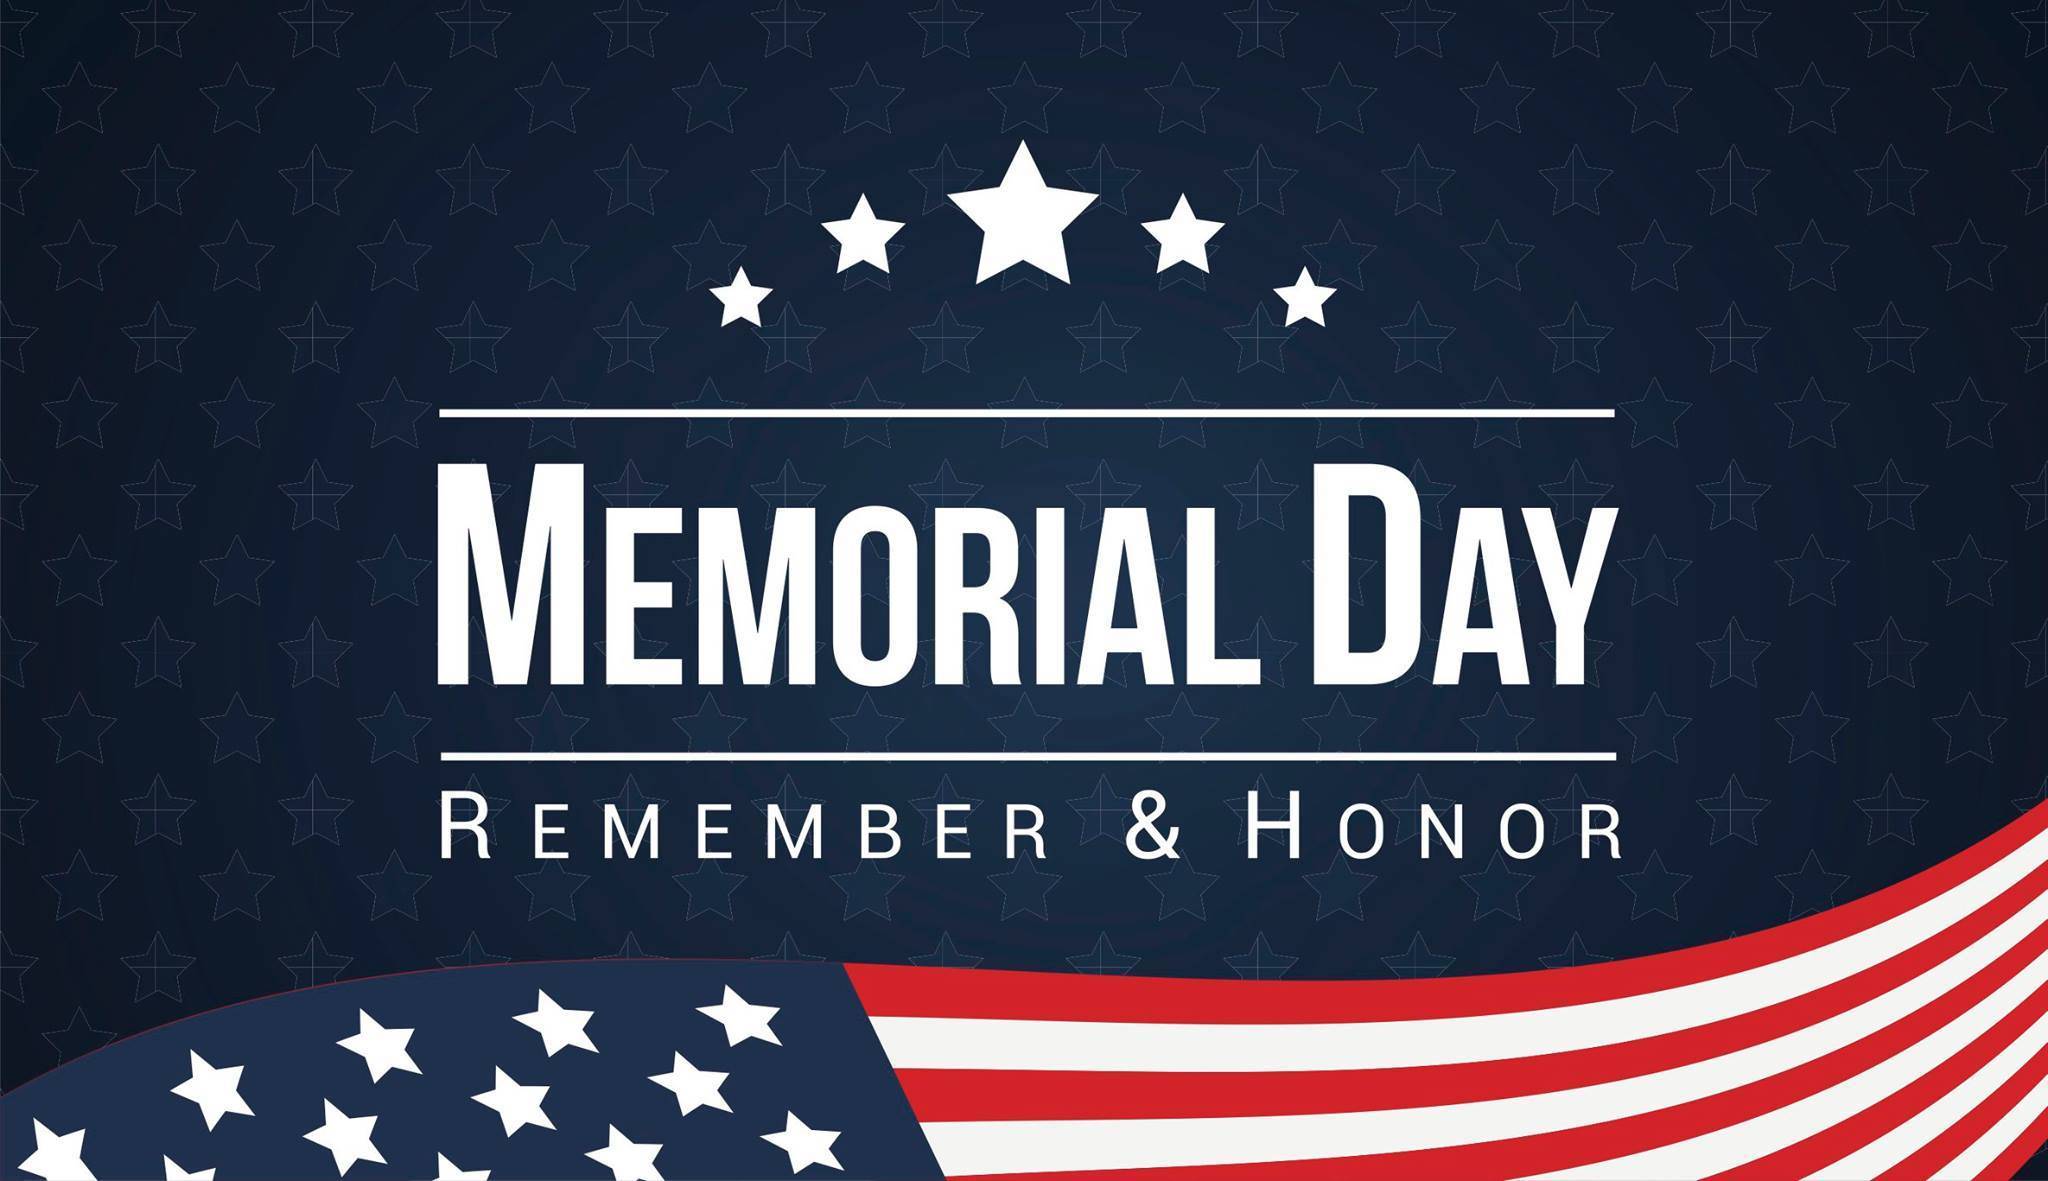 2021 Listing of Memorial Day Services